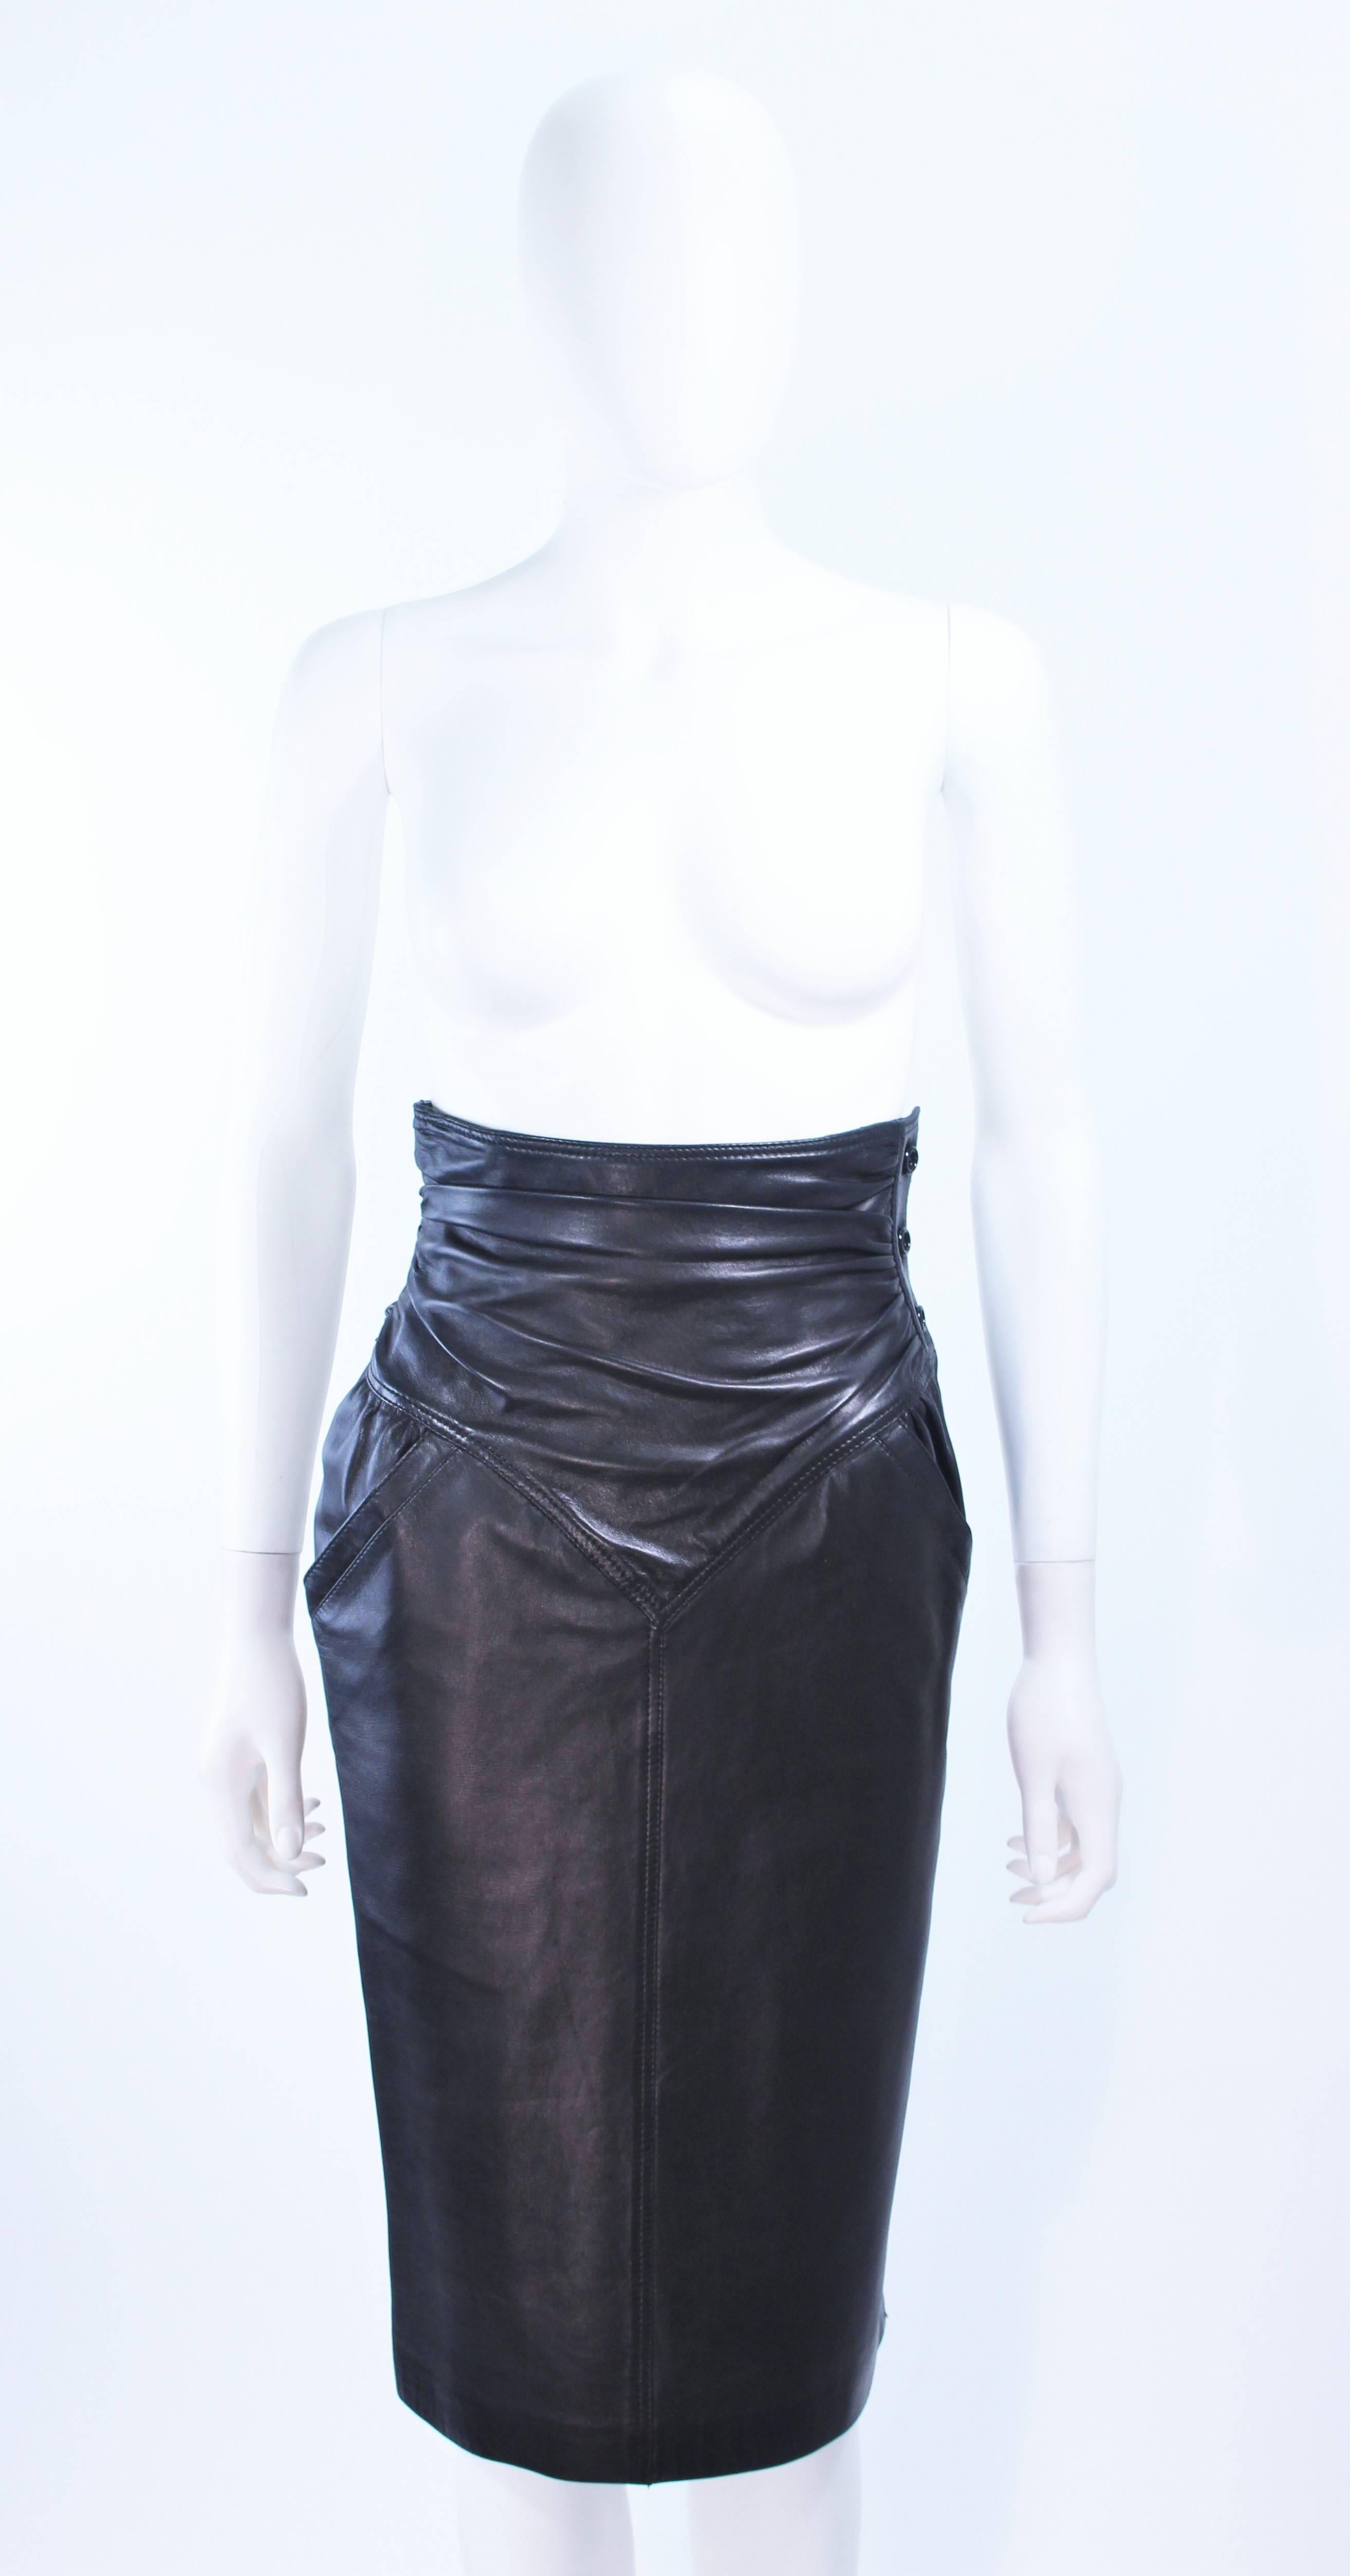 This Ungaro skirt is composed of a black leather and features a high waist style. There is a side zipper closure with buttons. In excellent vintage condition.

**Please cross-reference measurements for personal accuracy. Size in description box is